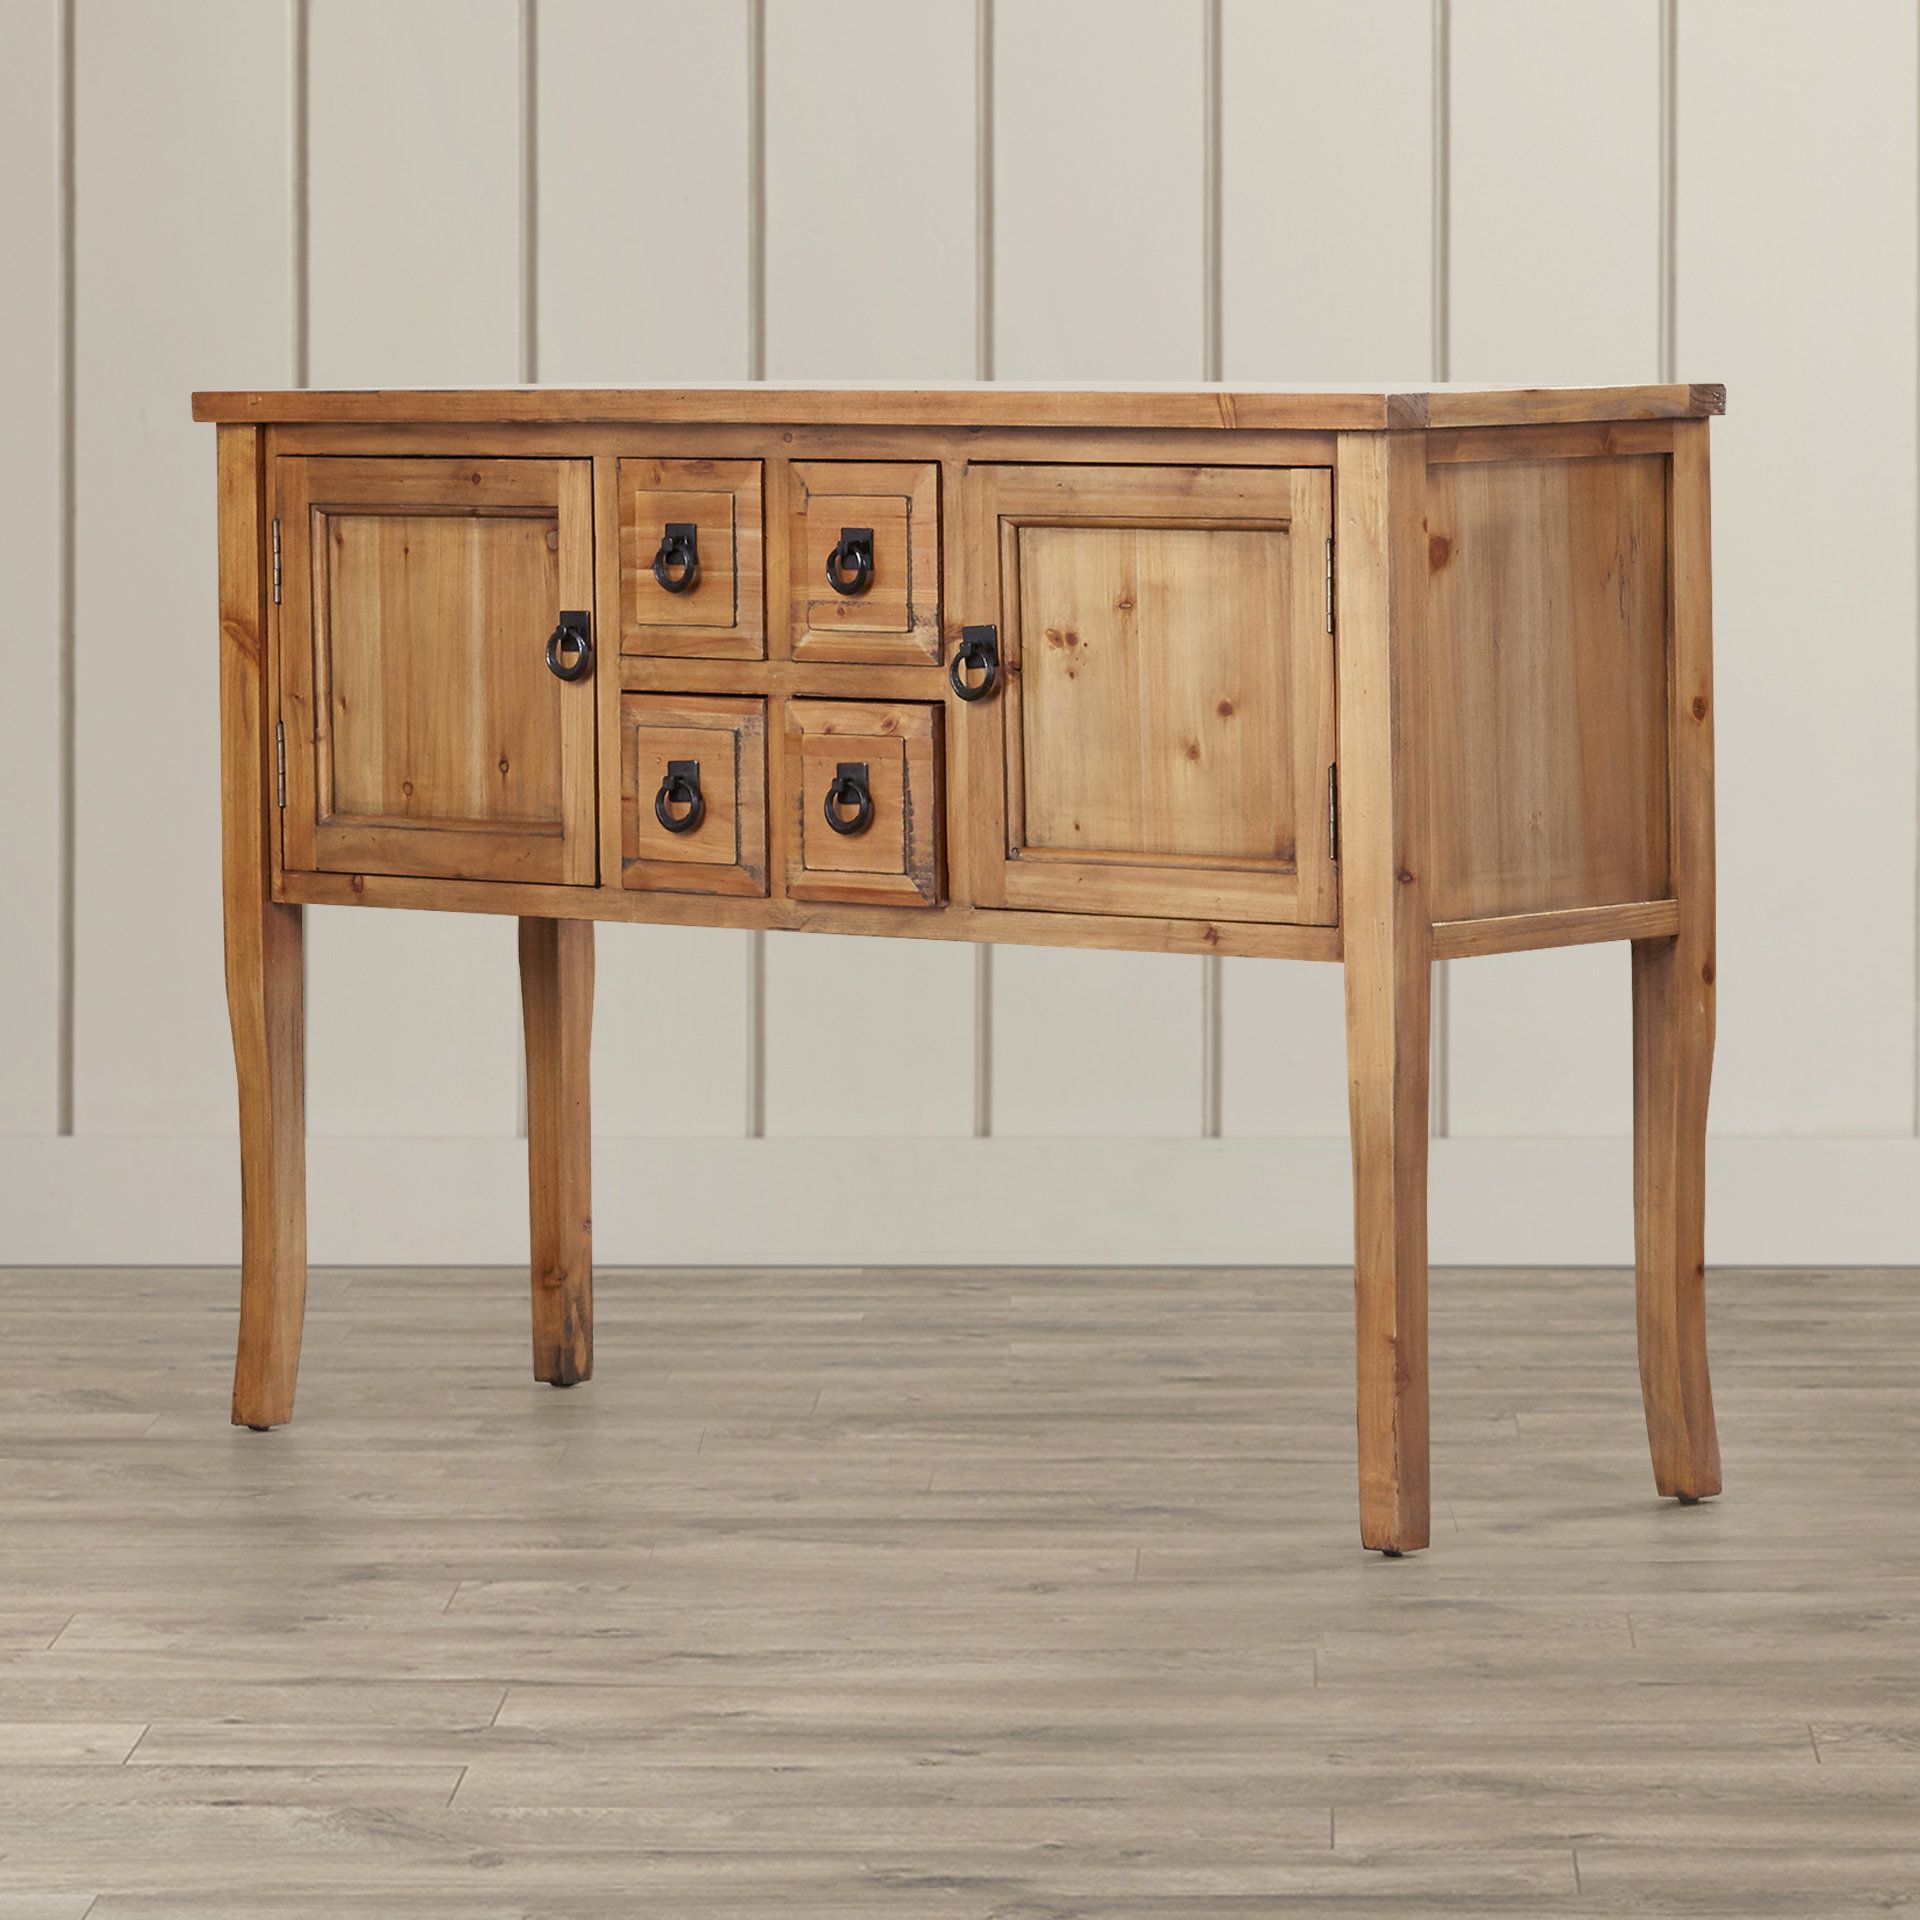 Rustic Sideboards & Buffets | Birch Lane With Regard To Most Recently Released Tilman Sideboards (View 15 of 20)